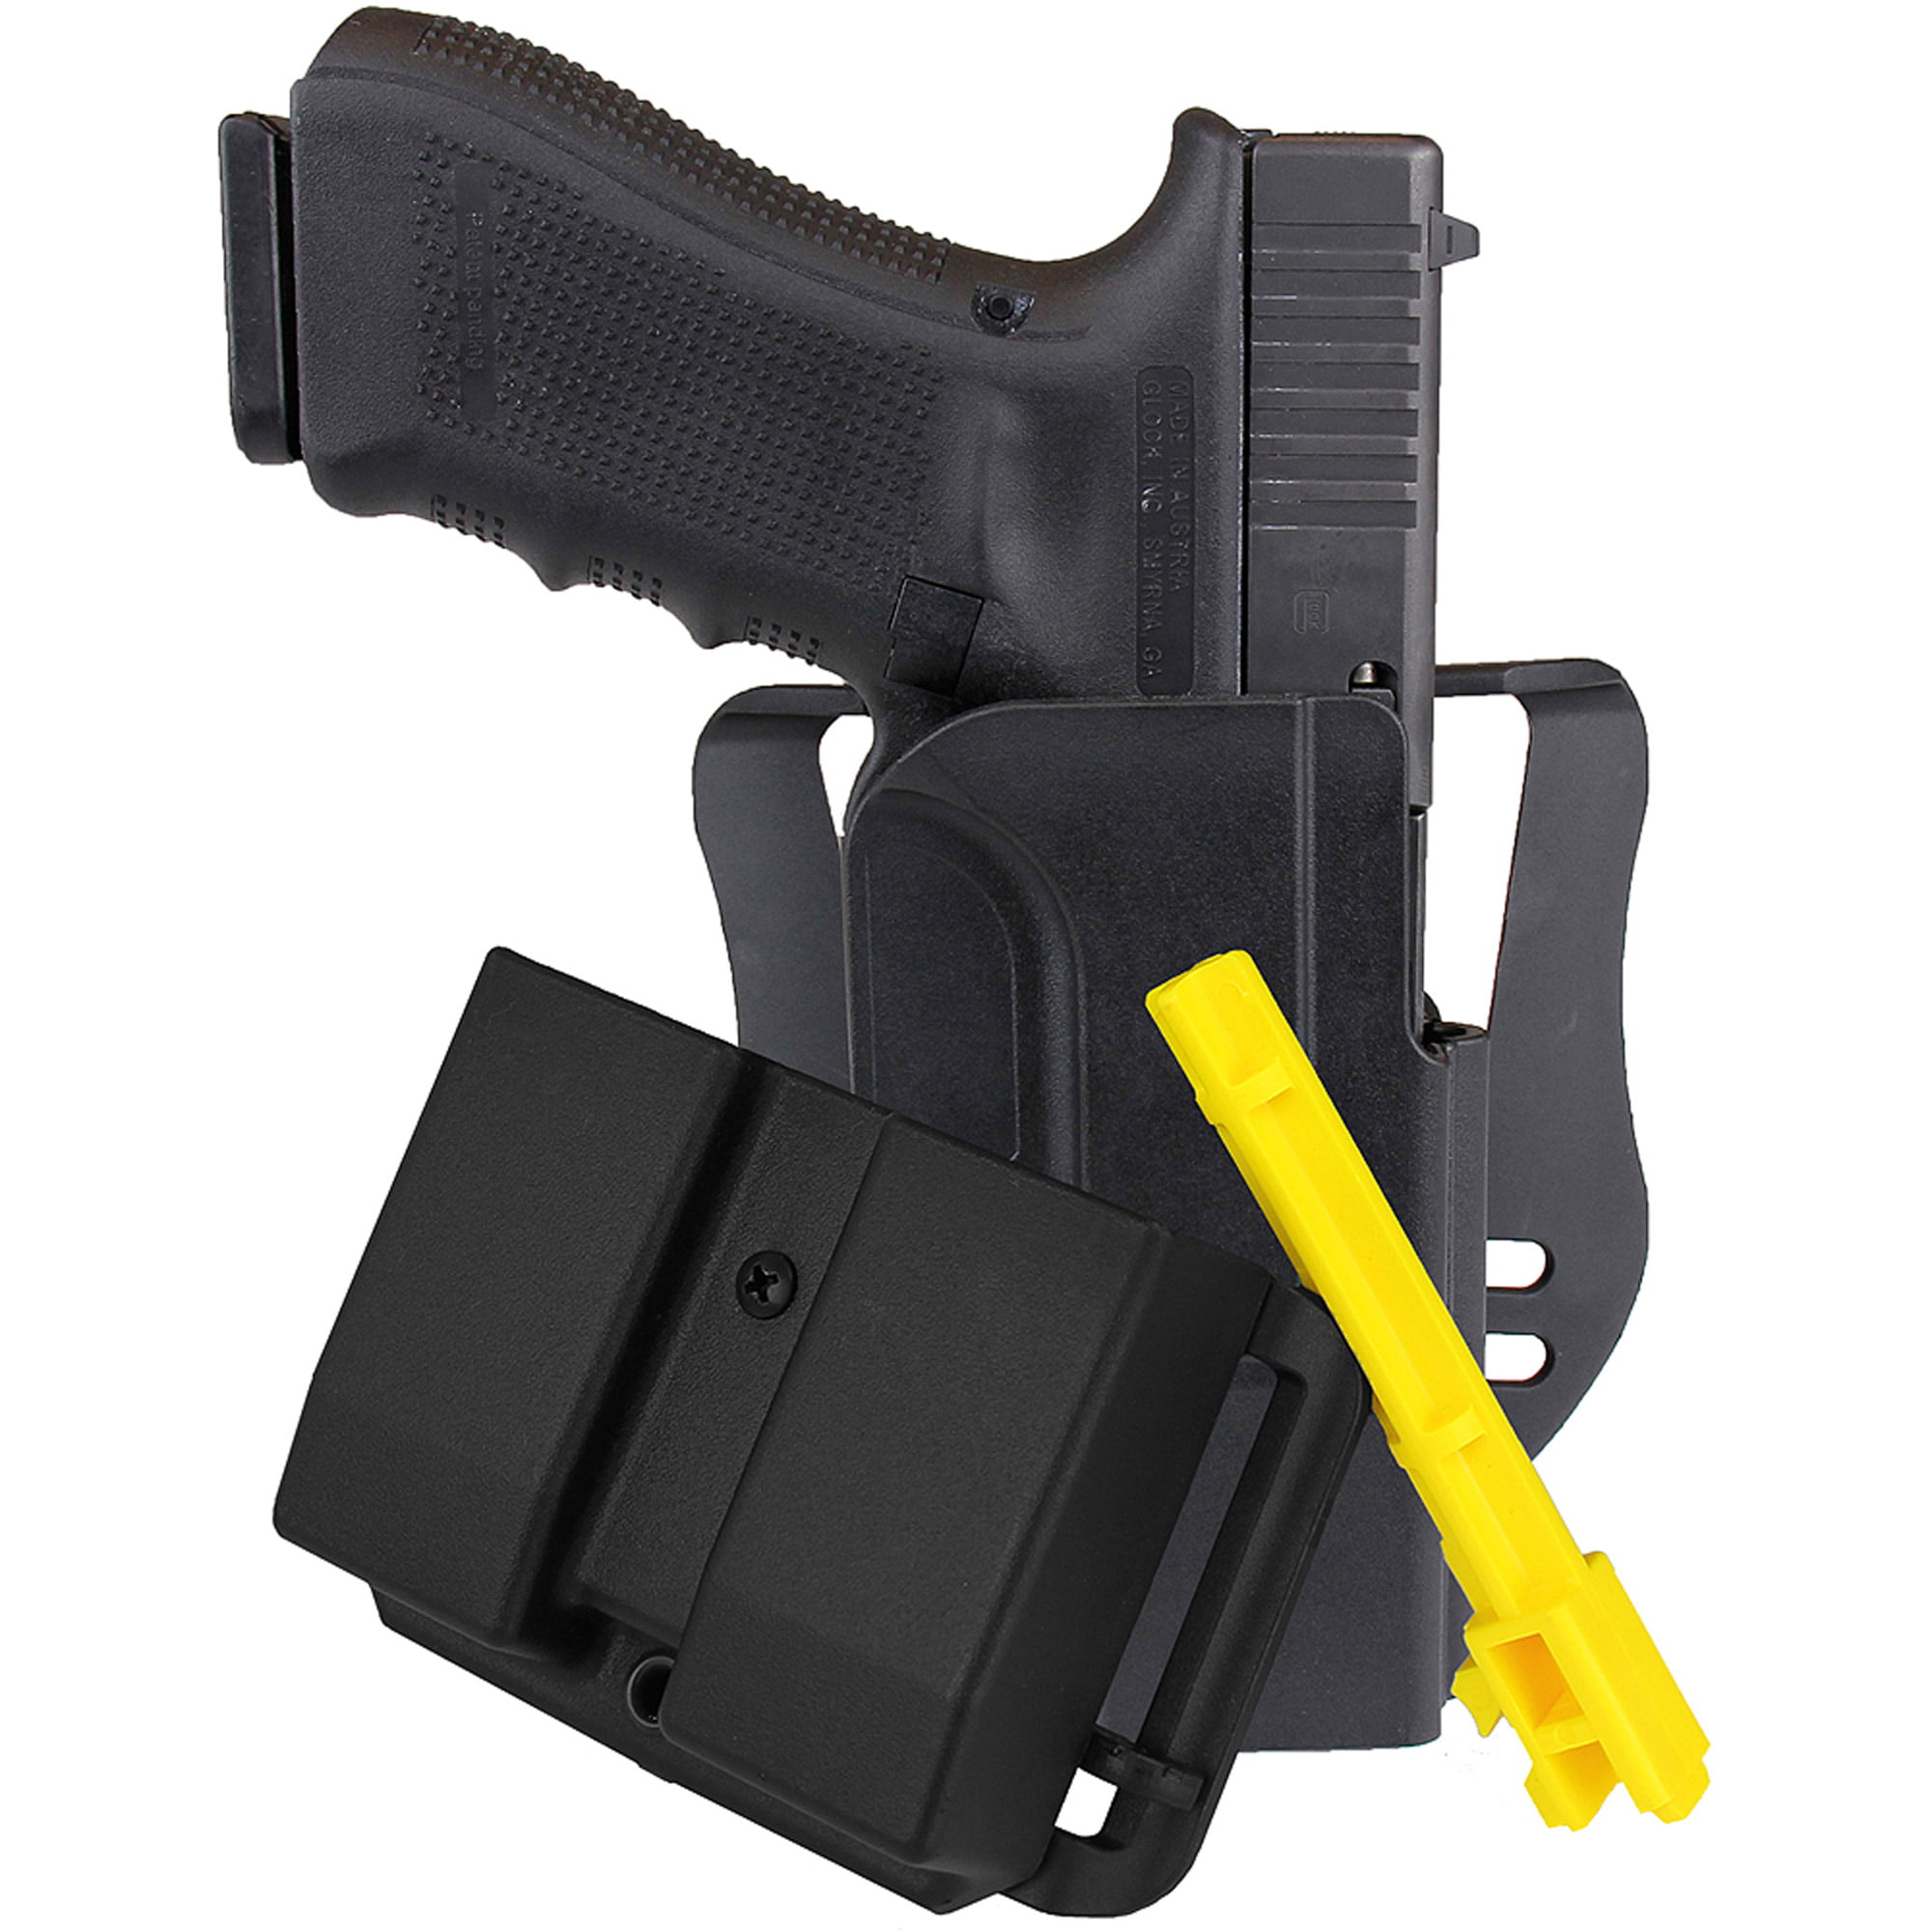 1 Right Free Shipping. 1 Left TWO 3D Printed Magazine Holsters for GLOCK 9mm 